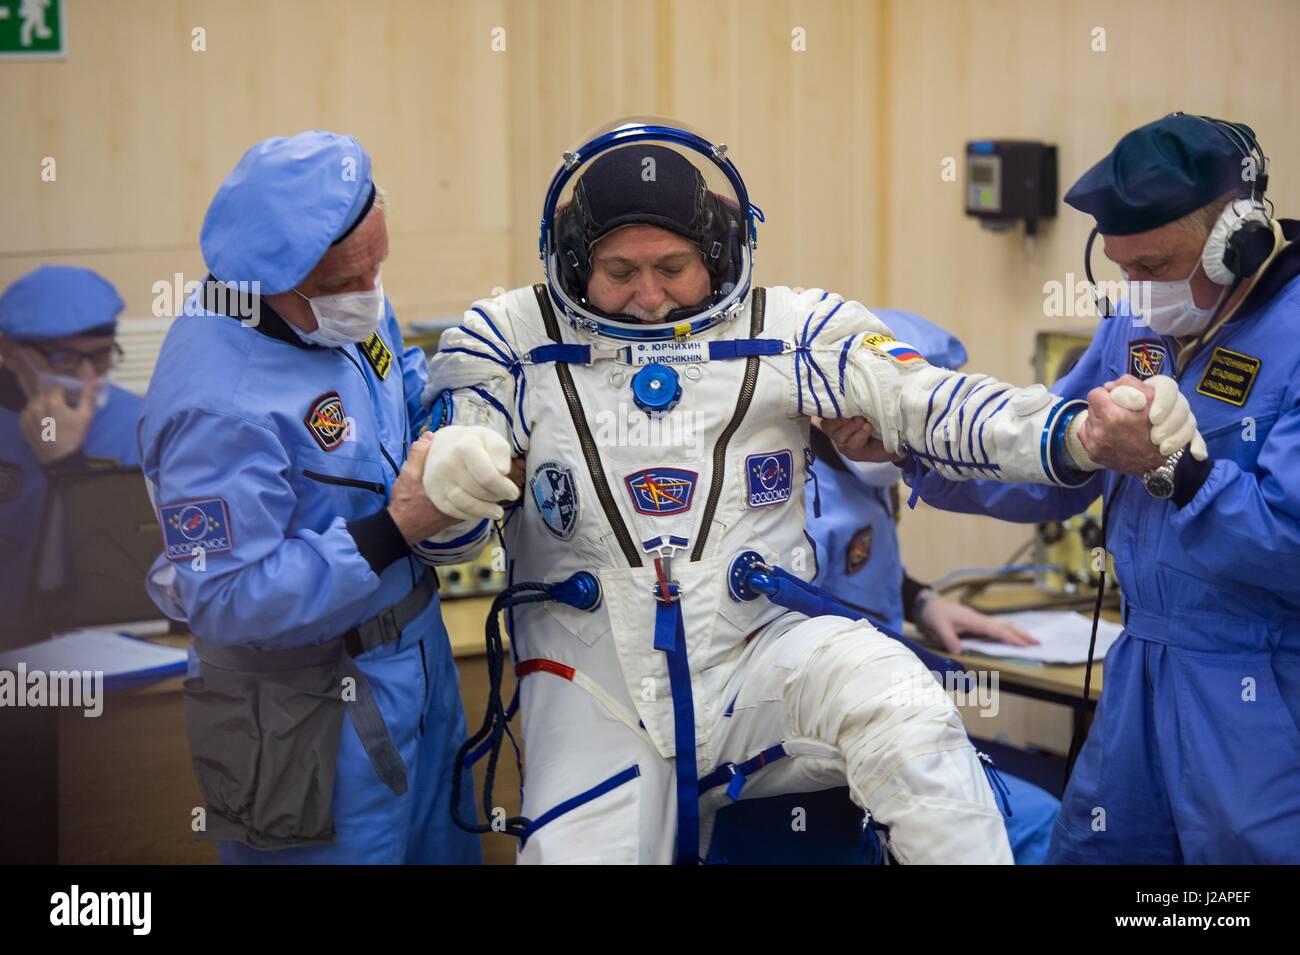 NASA International Space Station Expedition 51 prime crew member Russian cosmonaut Fyodor Yurchikhin of Roscosmos has his Russian Sokol launch and entry spacesuit pressure-checked in preparation for the Soyuz MS-04 launch at the Baikonur Cosmodrome April 20, 2017 in Baikonur, Kazakhstan.     (photo by Aubrey Gemignani /NASA  via Planetpix) Stock Photo